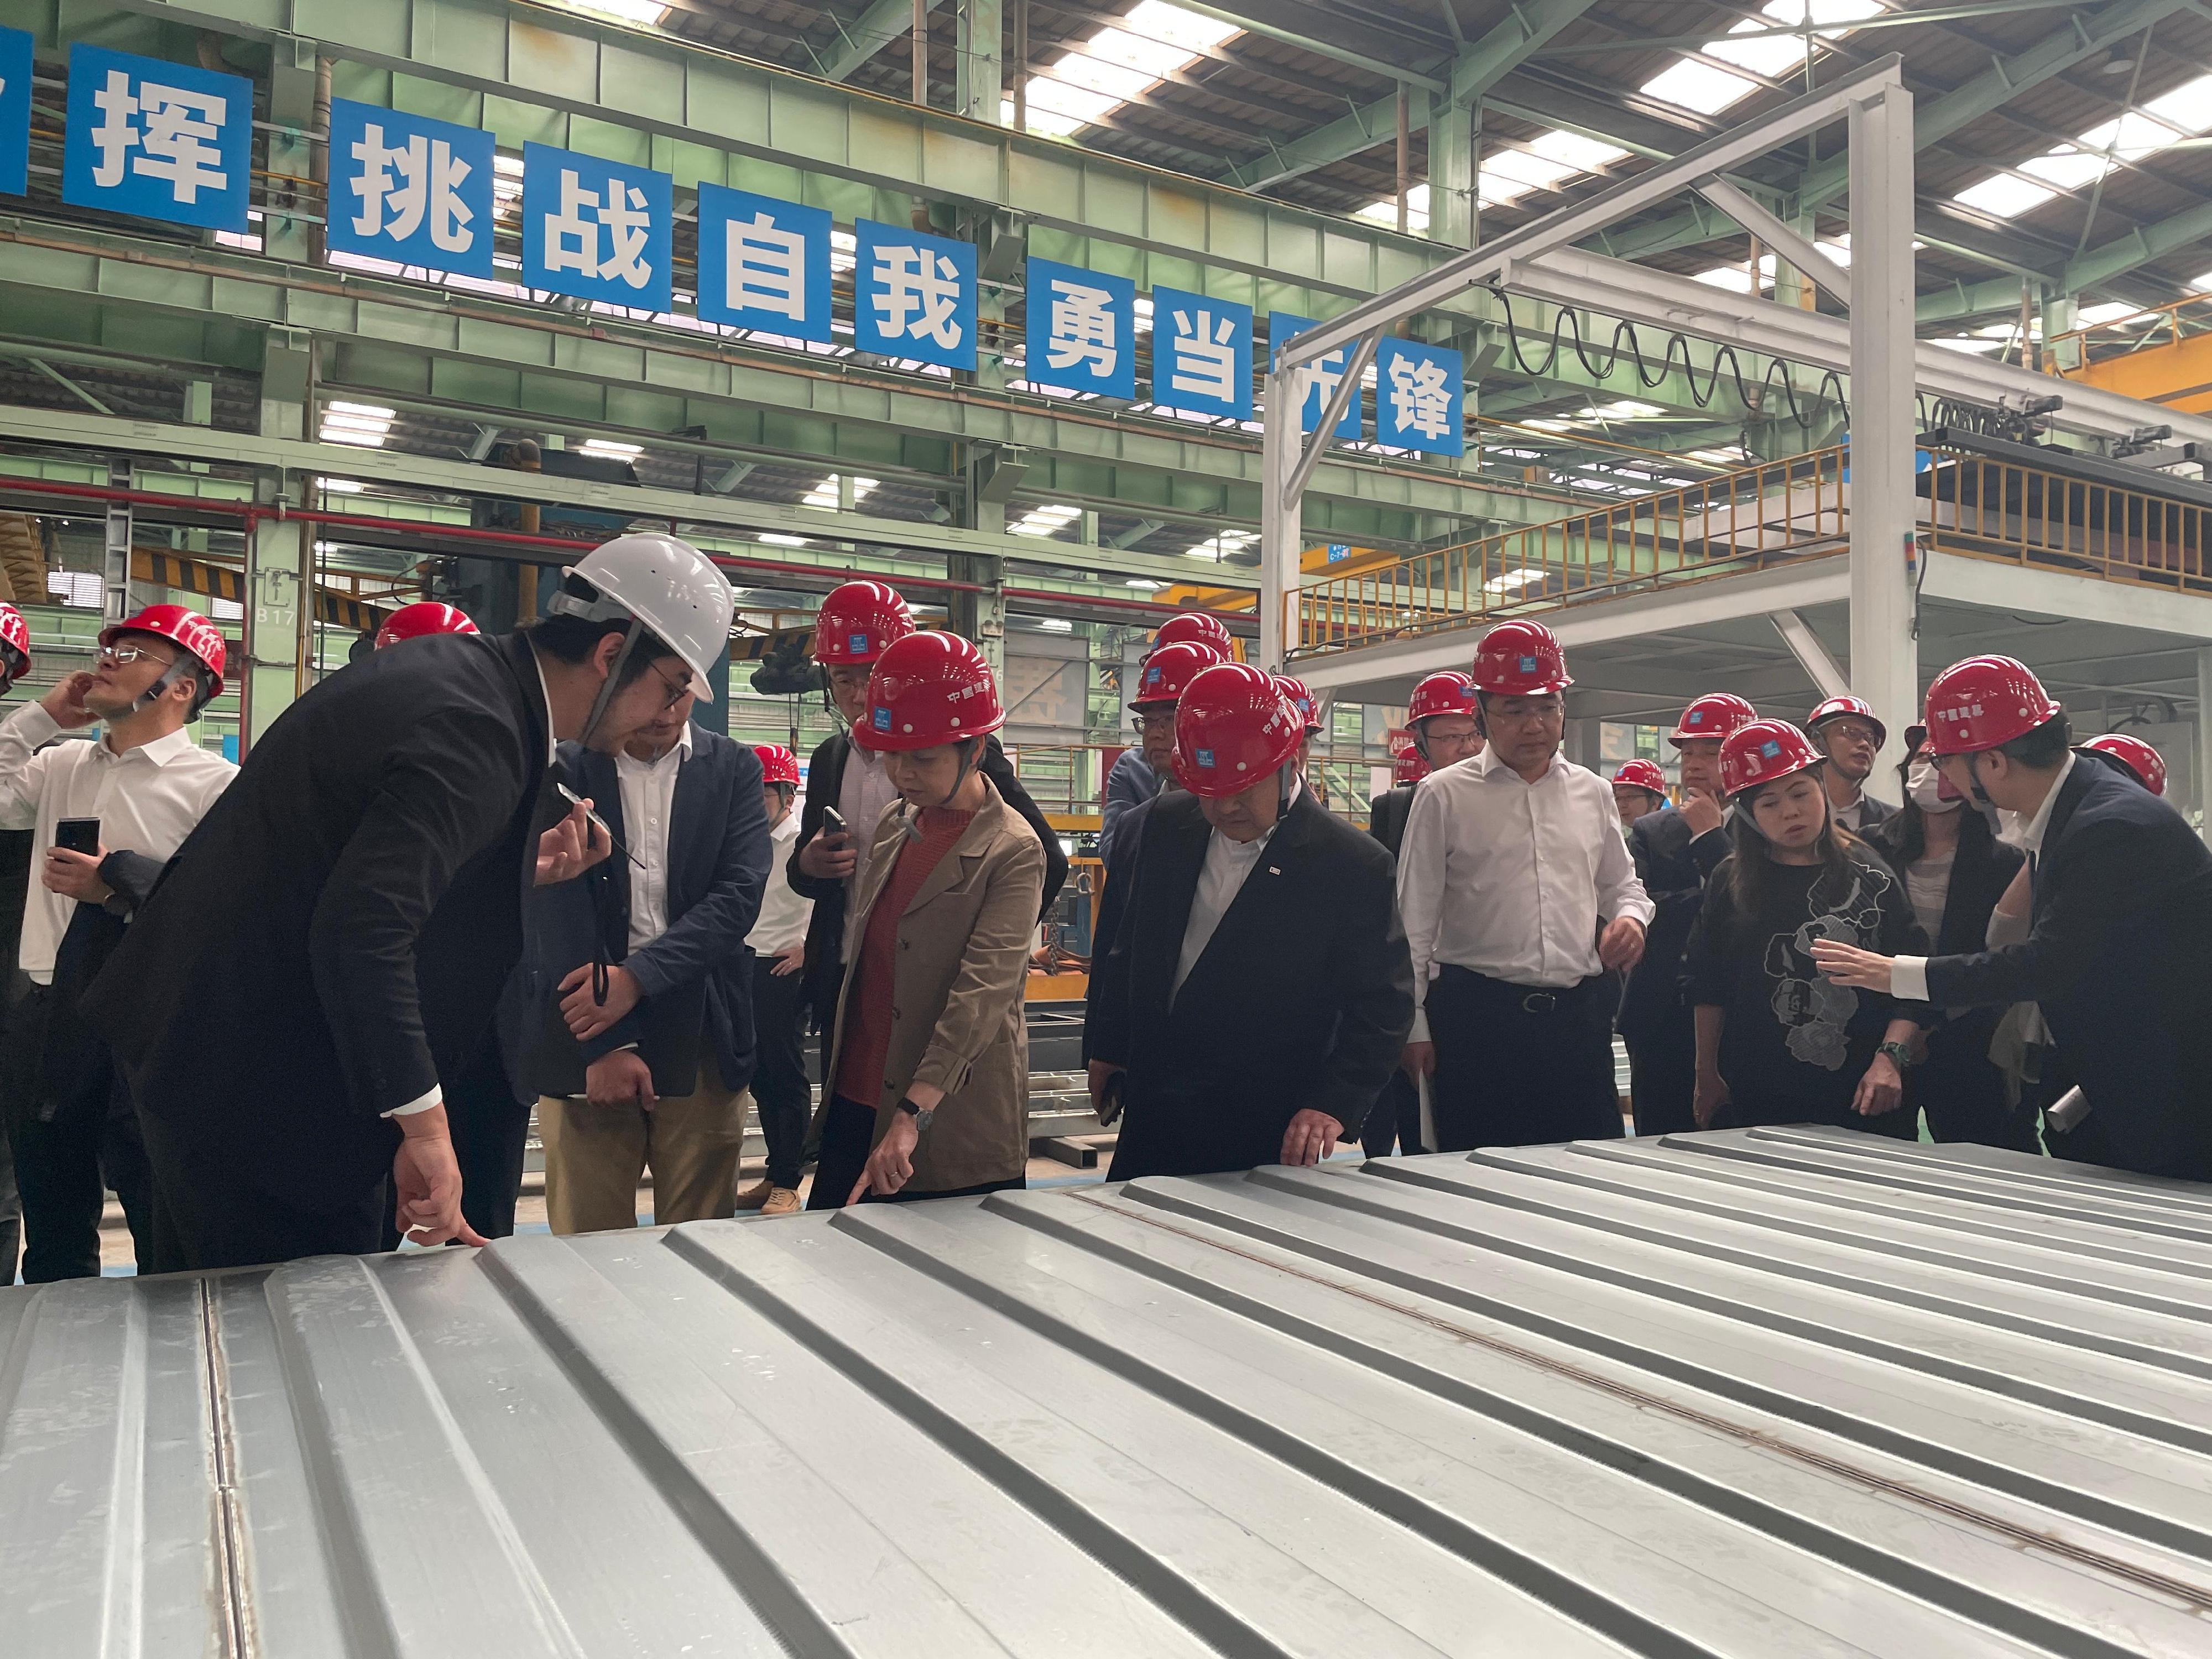 The Secretary for Housing, Ms Winnie Ho, and a delegation of representatives from the Housing Bureau and the Architectural Services Department visited Huizhou today (March 25) to inspect the production progress of Modular Integrated Construction (MiC) modules of Light Public Housing (LPH). Photo shows Ms Ho (front row, second left) visiting CSCEC Science and Industry Greentech Corporation Limited to inspect the factory manufacturing LPH MiC modules.